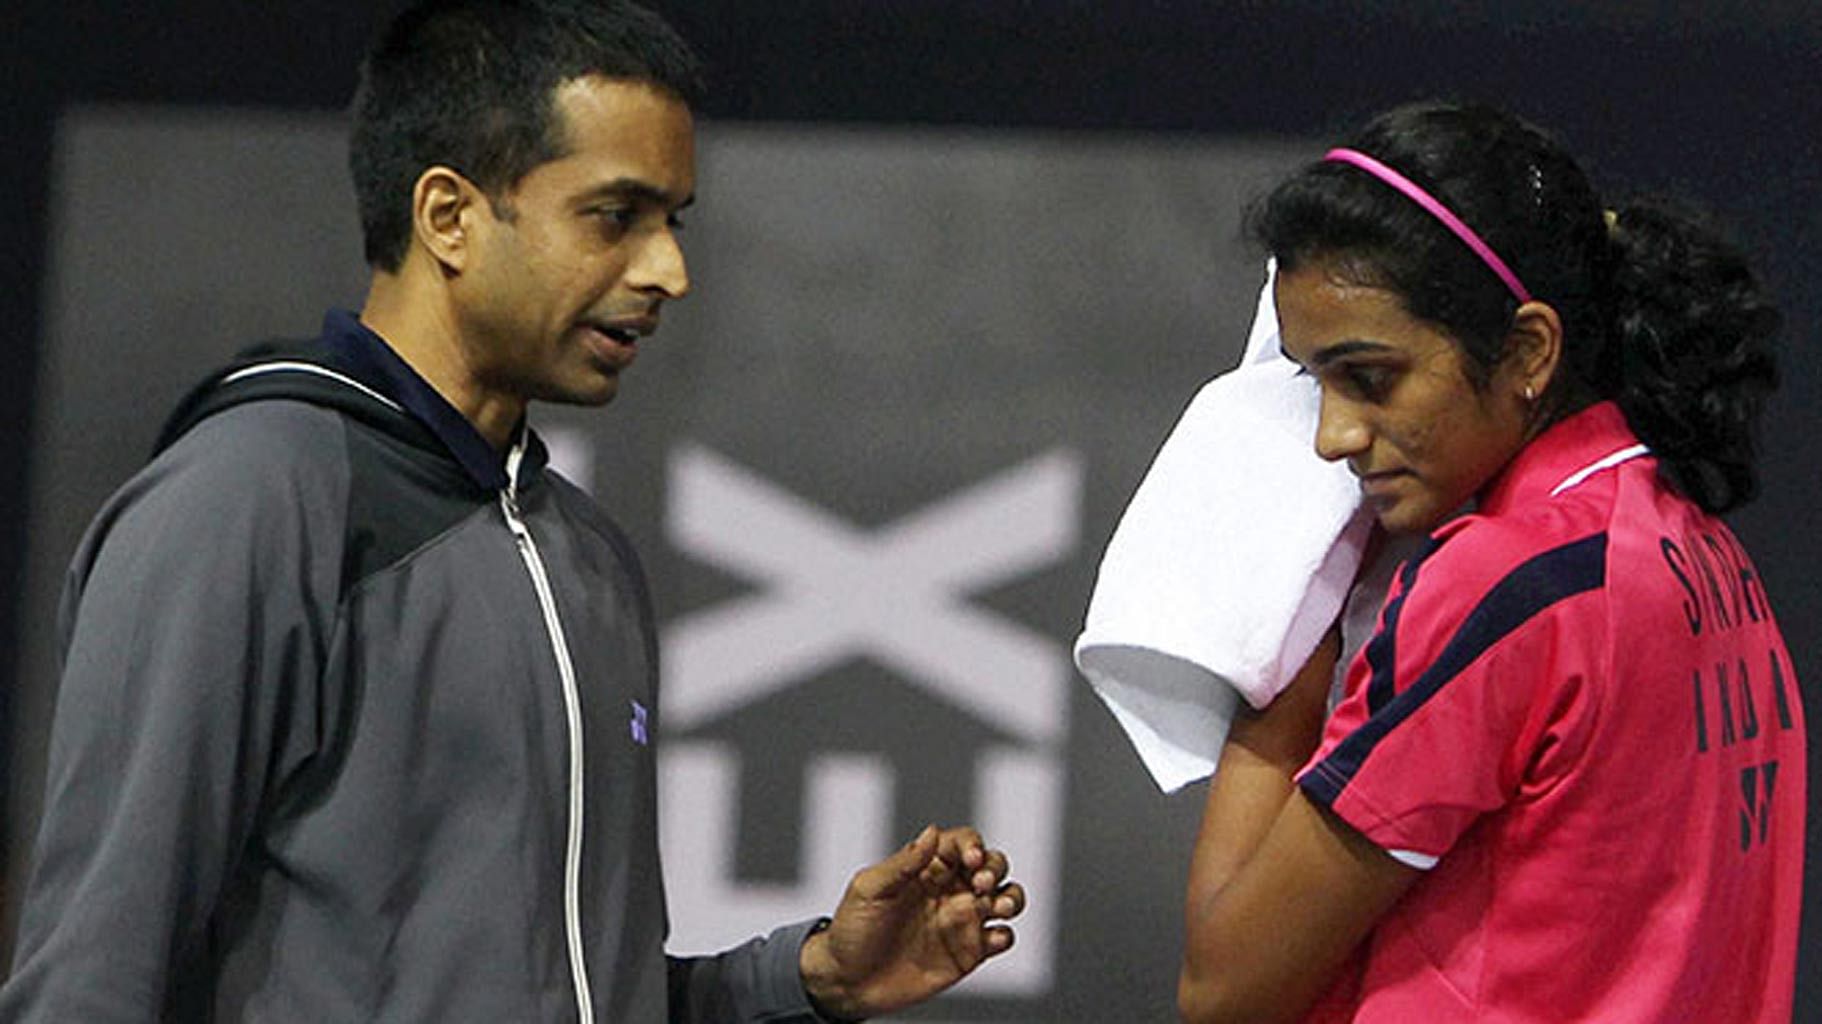 PV Sindhu Yet to Achieve Full Potential, Says Coach Gopichand